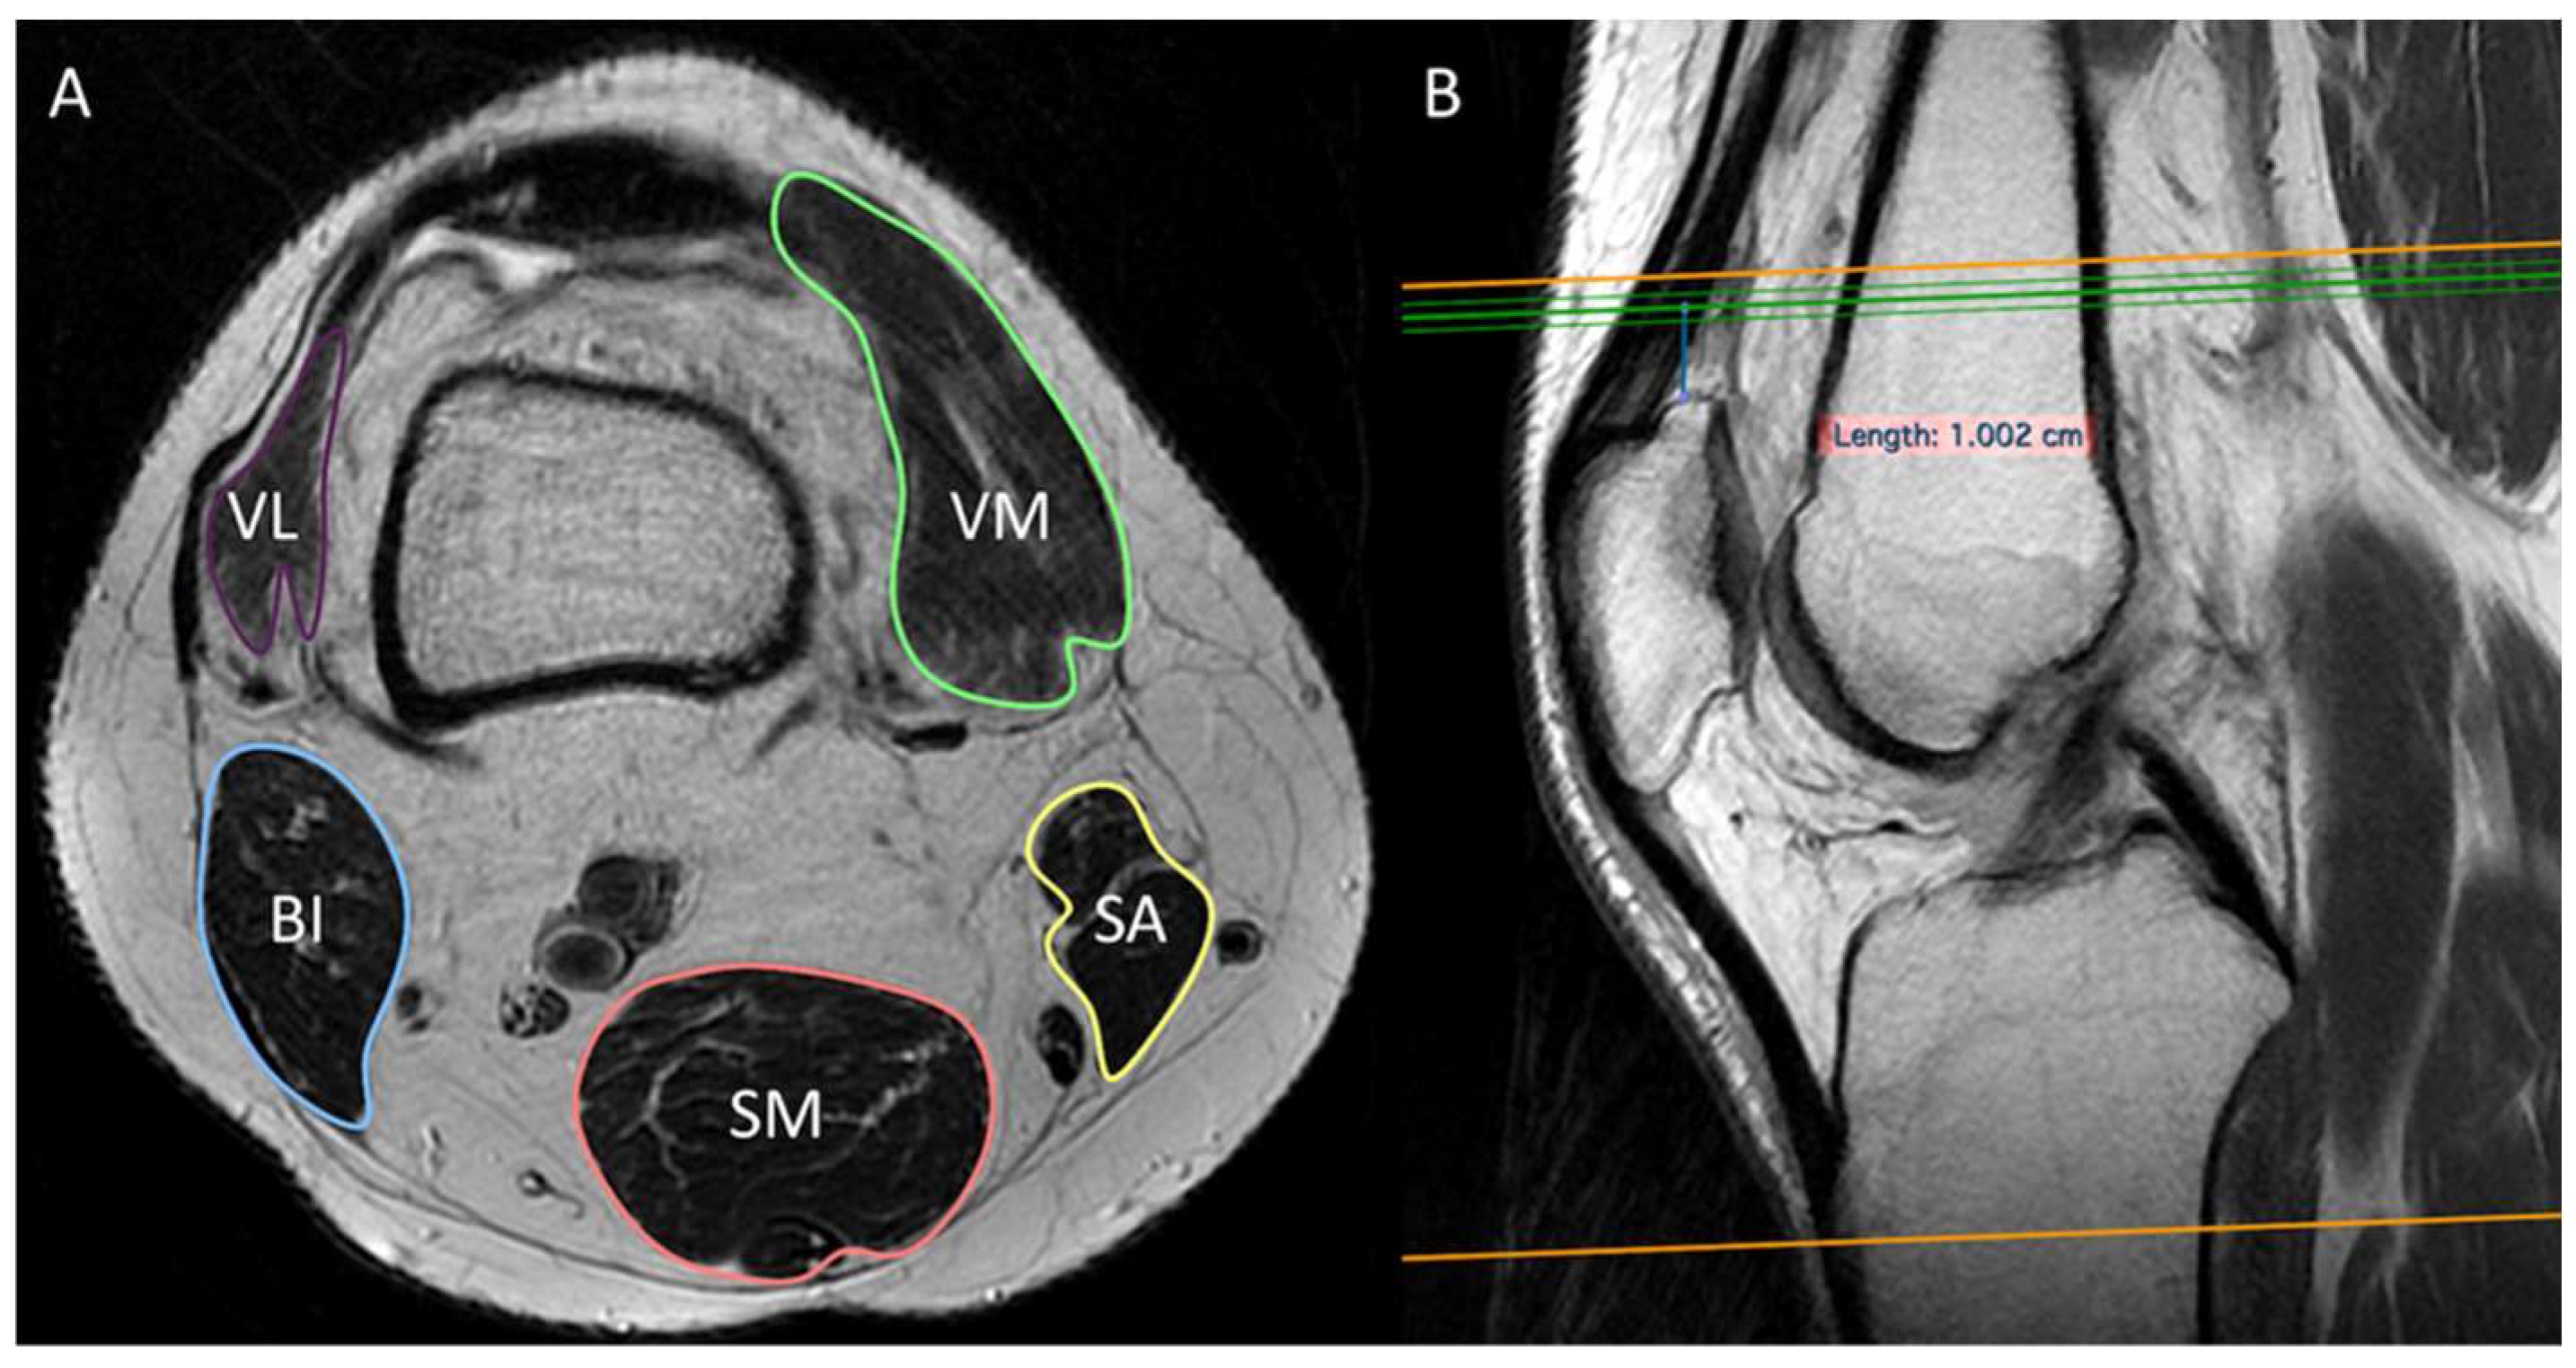 Thigh burn – A magnetic resonance imaging (MRI) related adverse